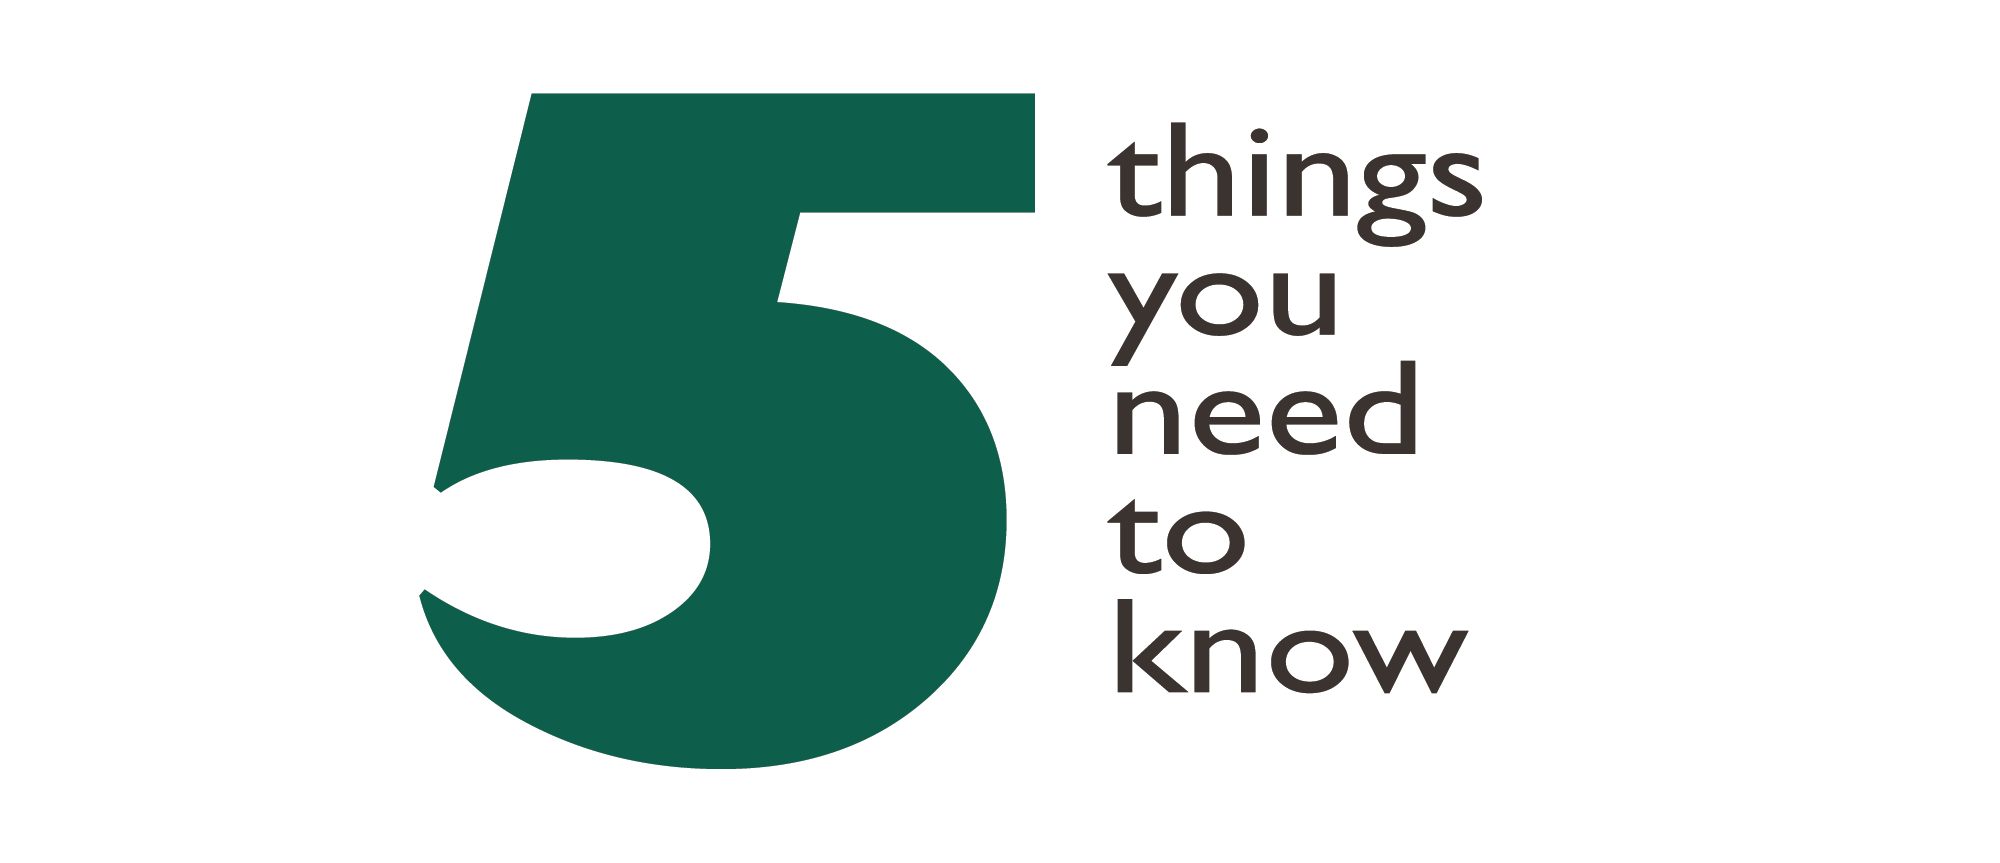 Five things everyone should know